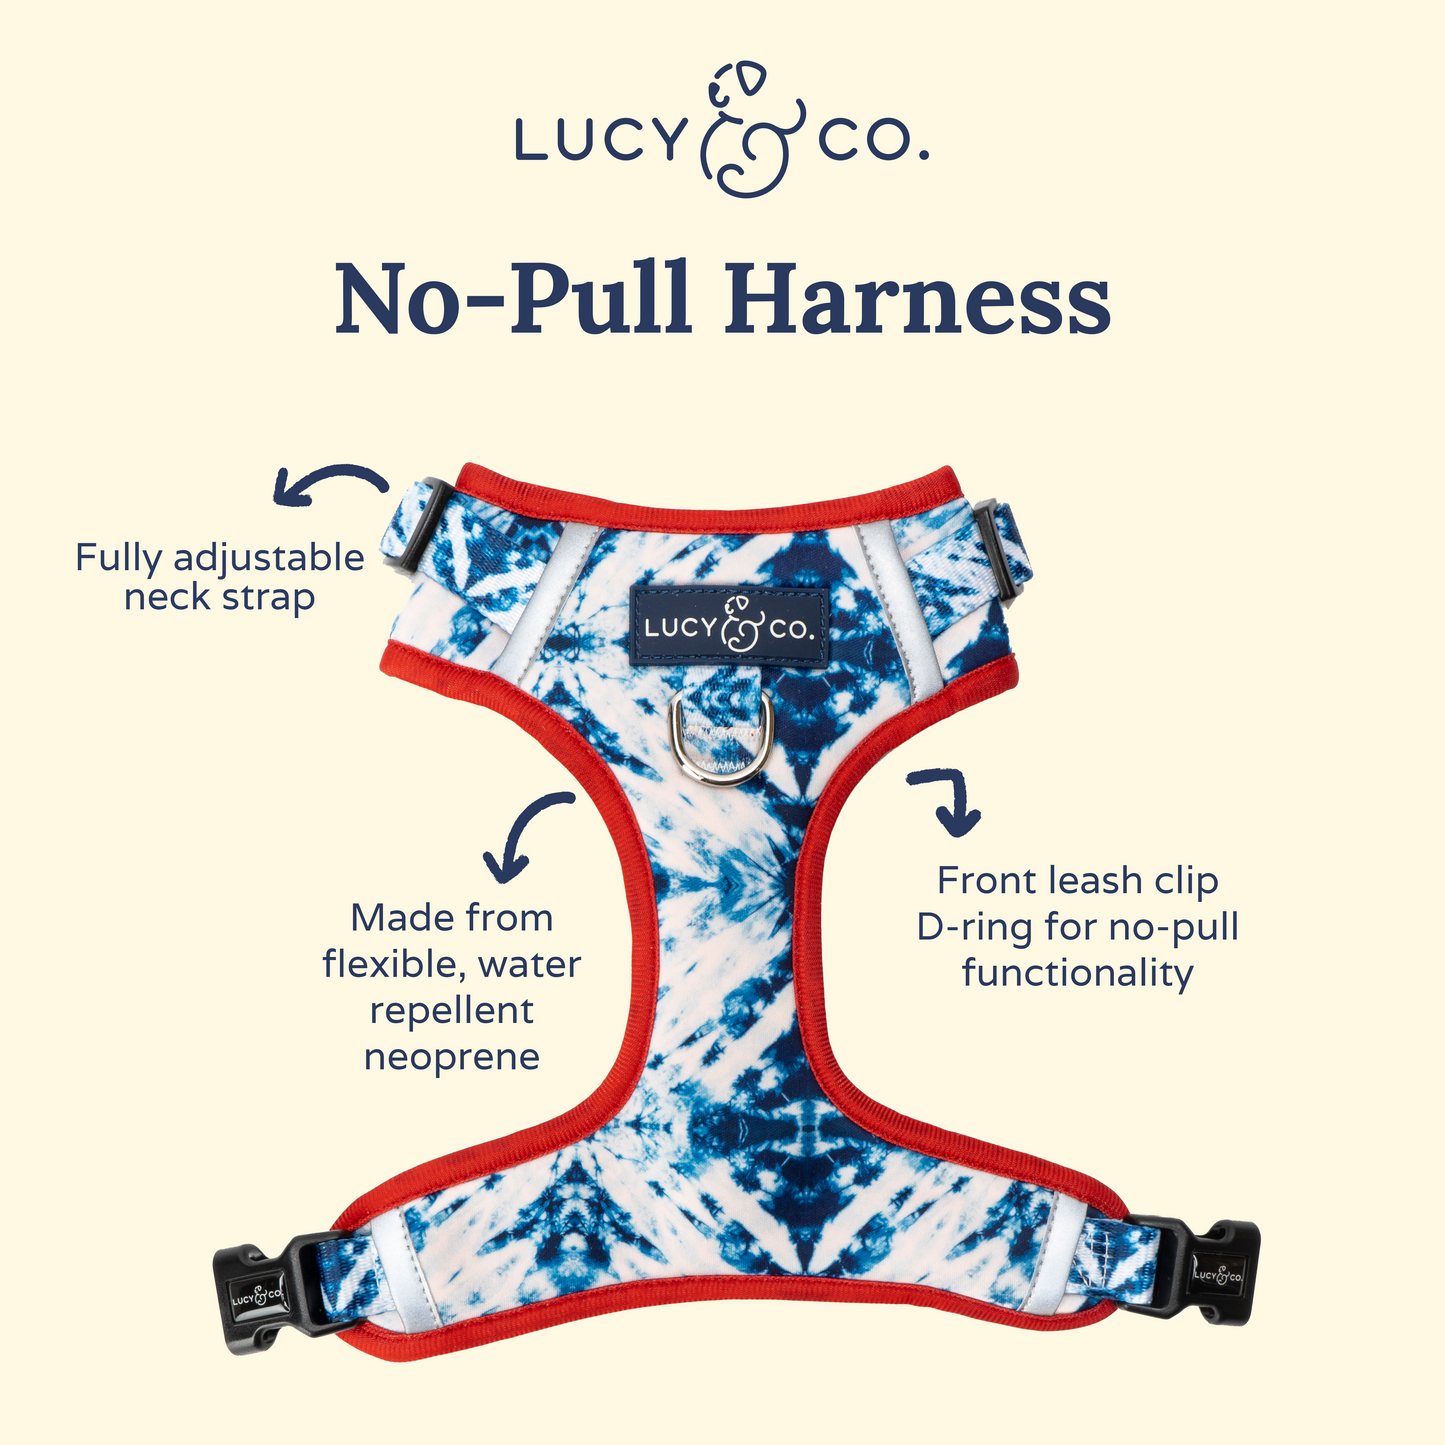 The Blueberry Twist No-Pull Harness